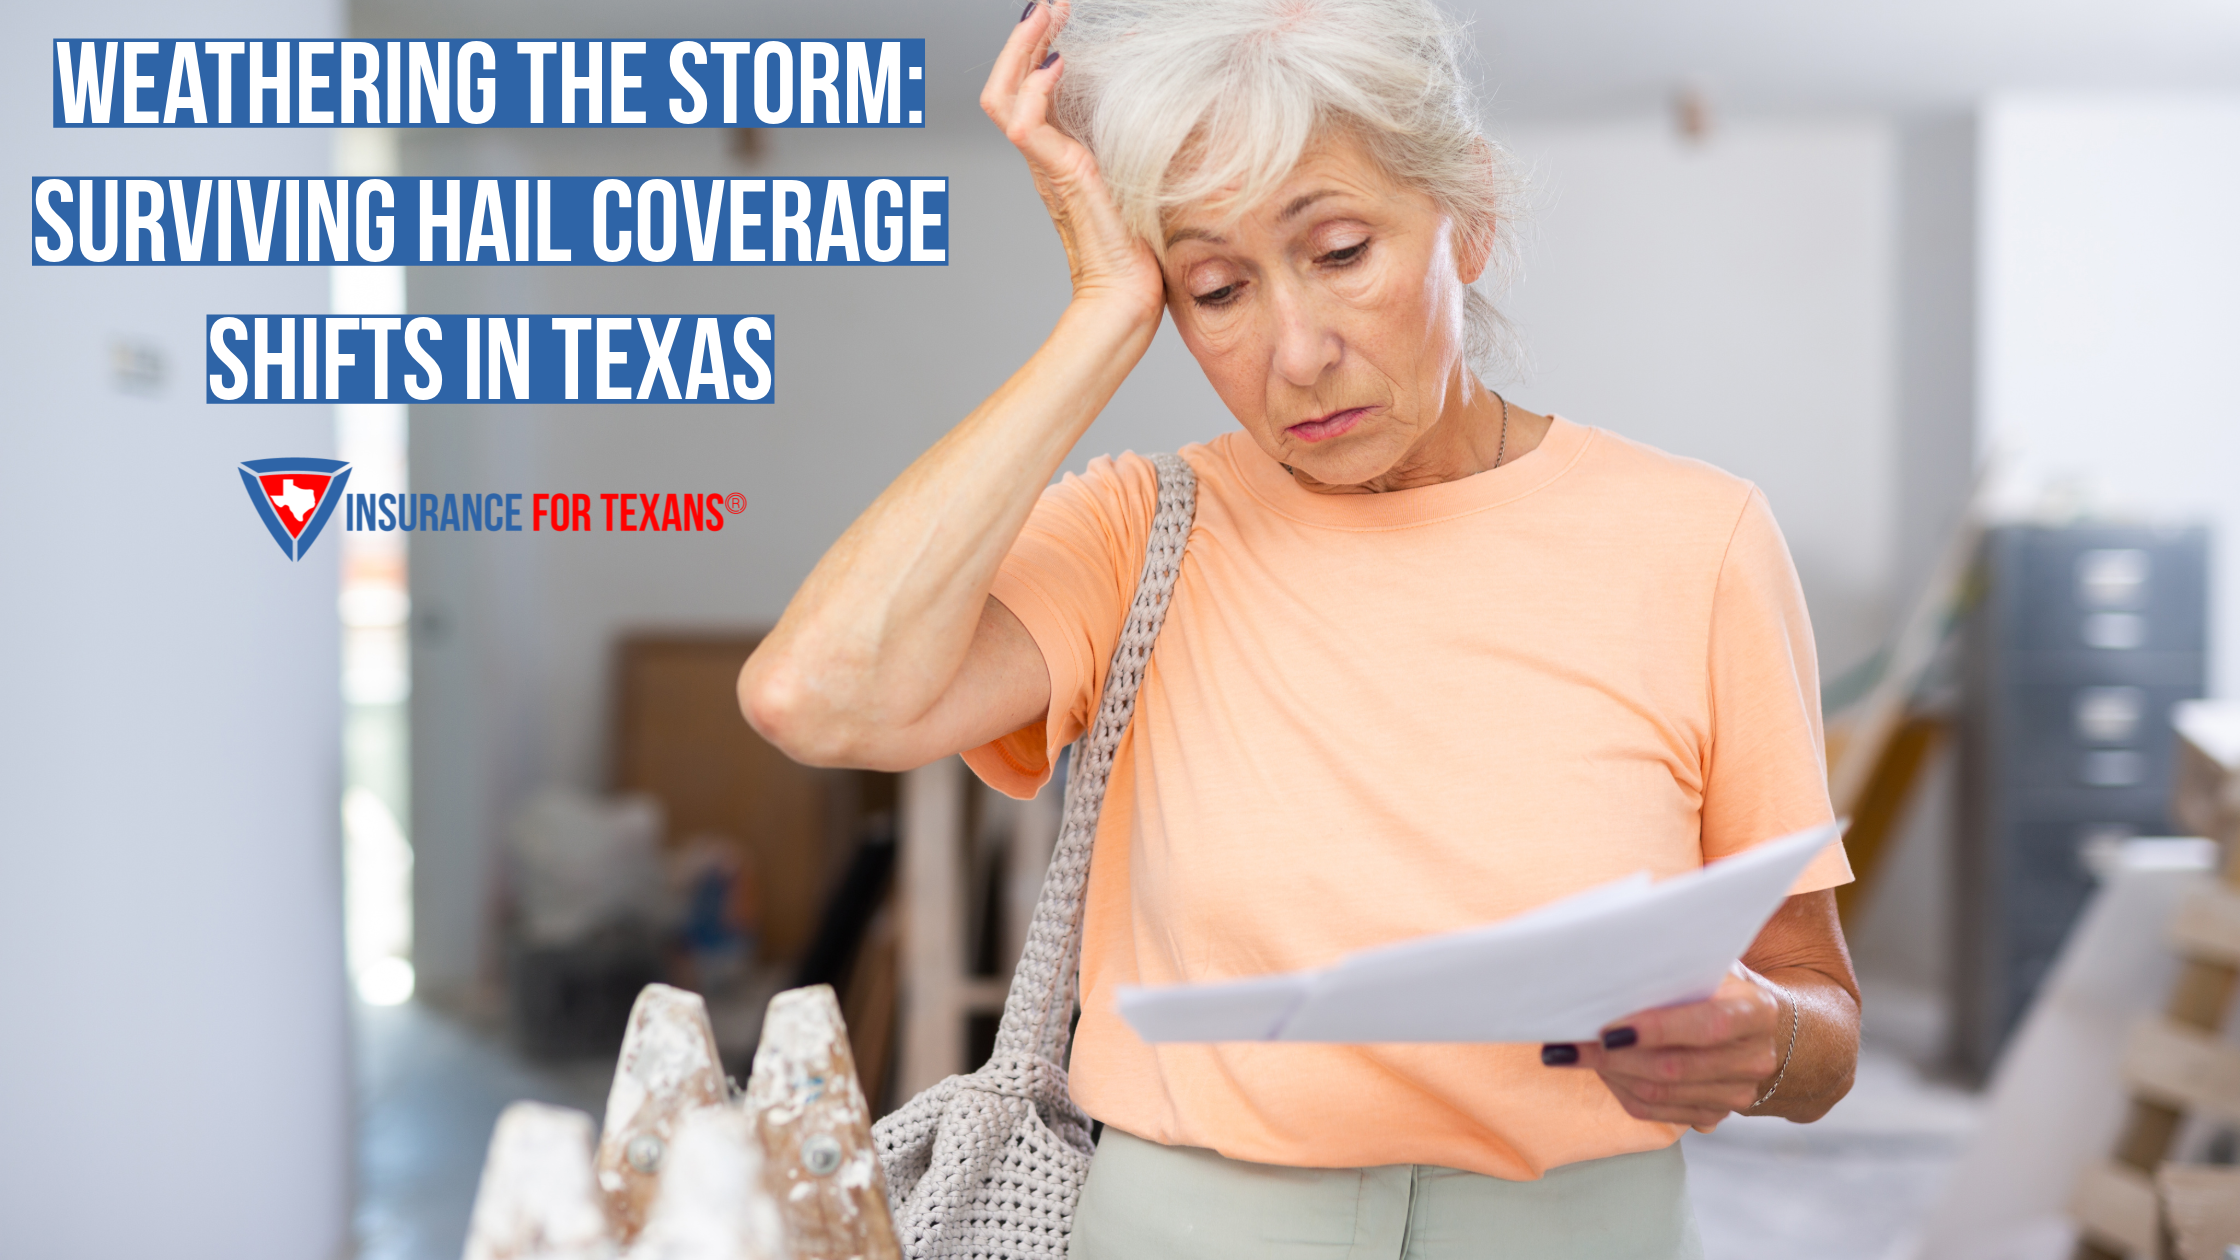 Weathering the Storm: Surviving Hail Coverage Shifts in Texas